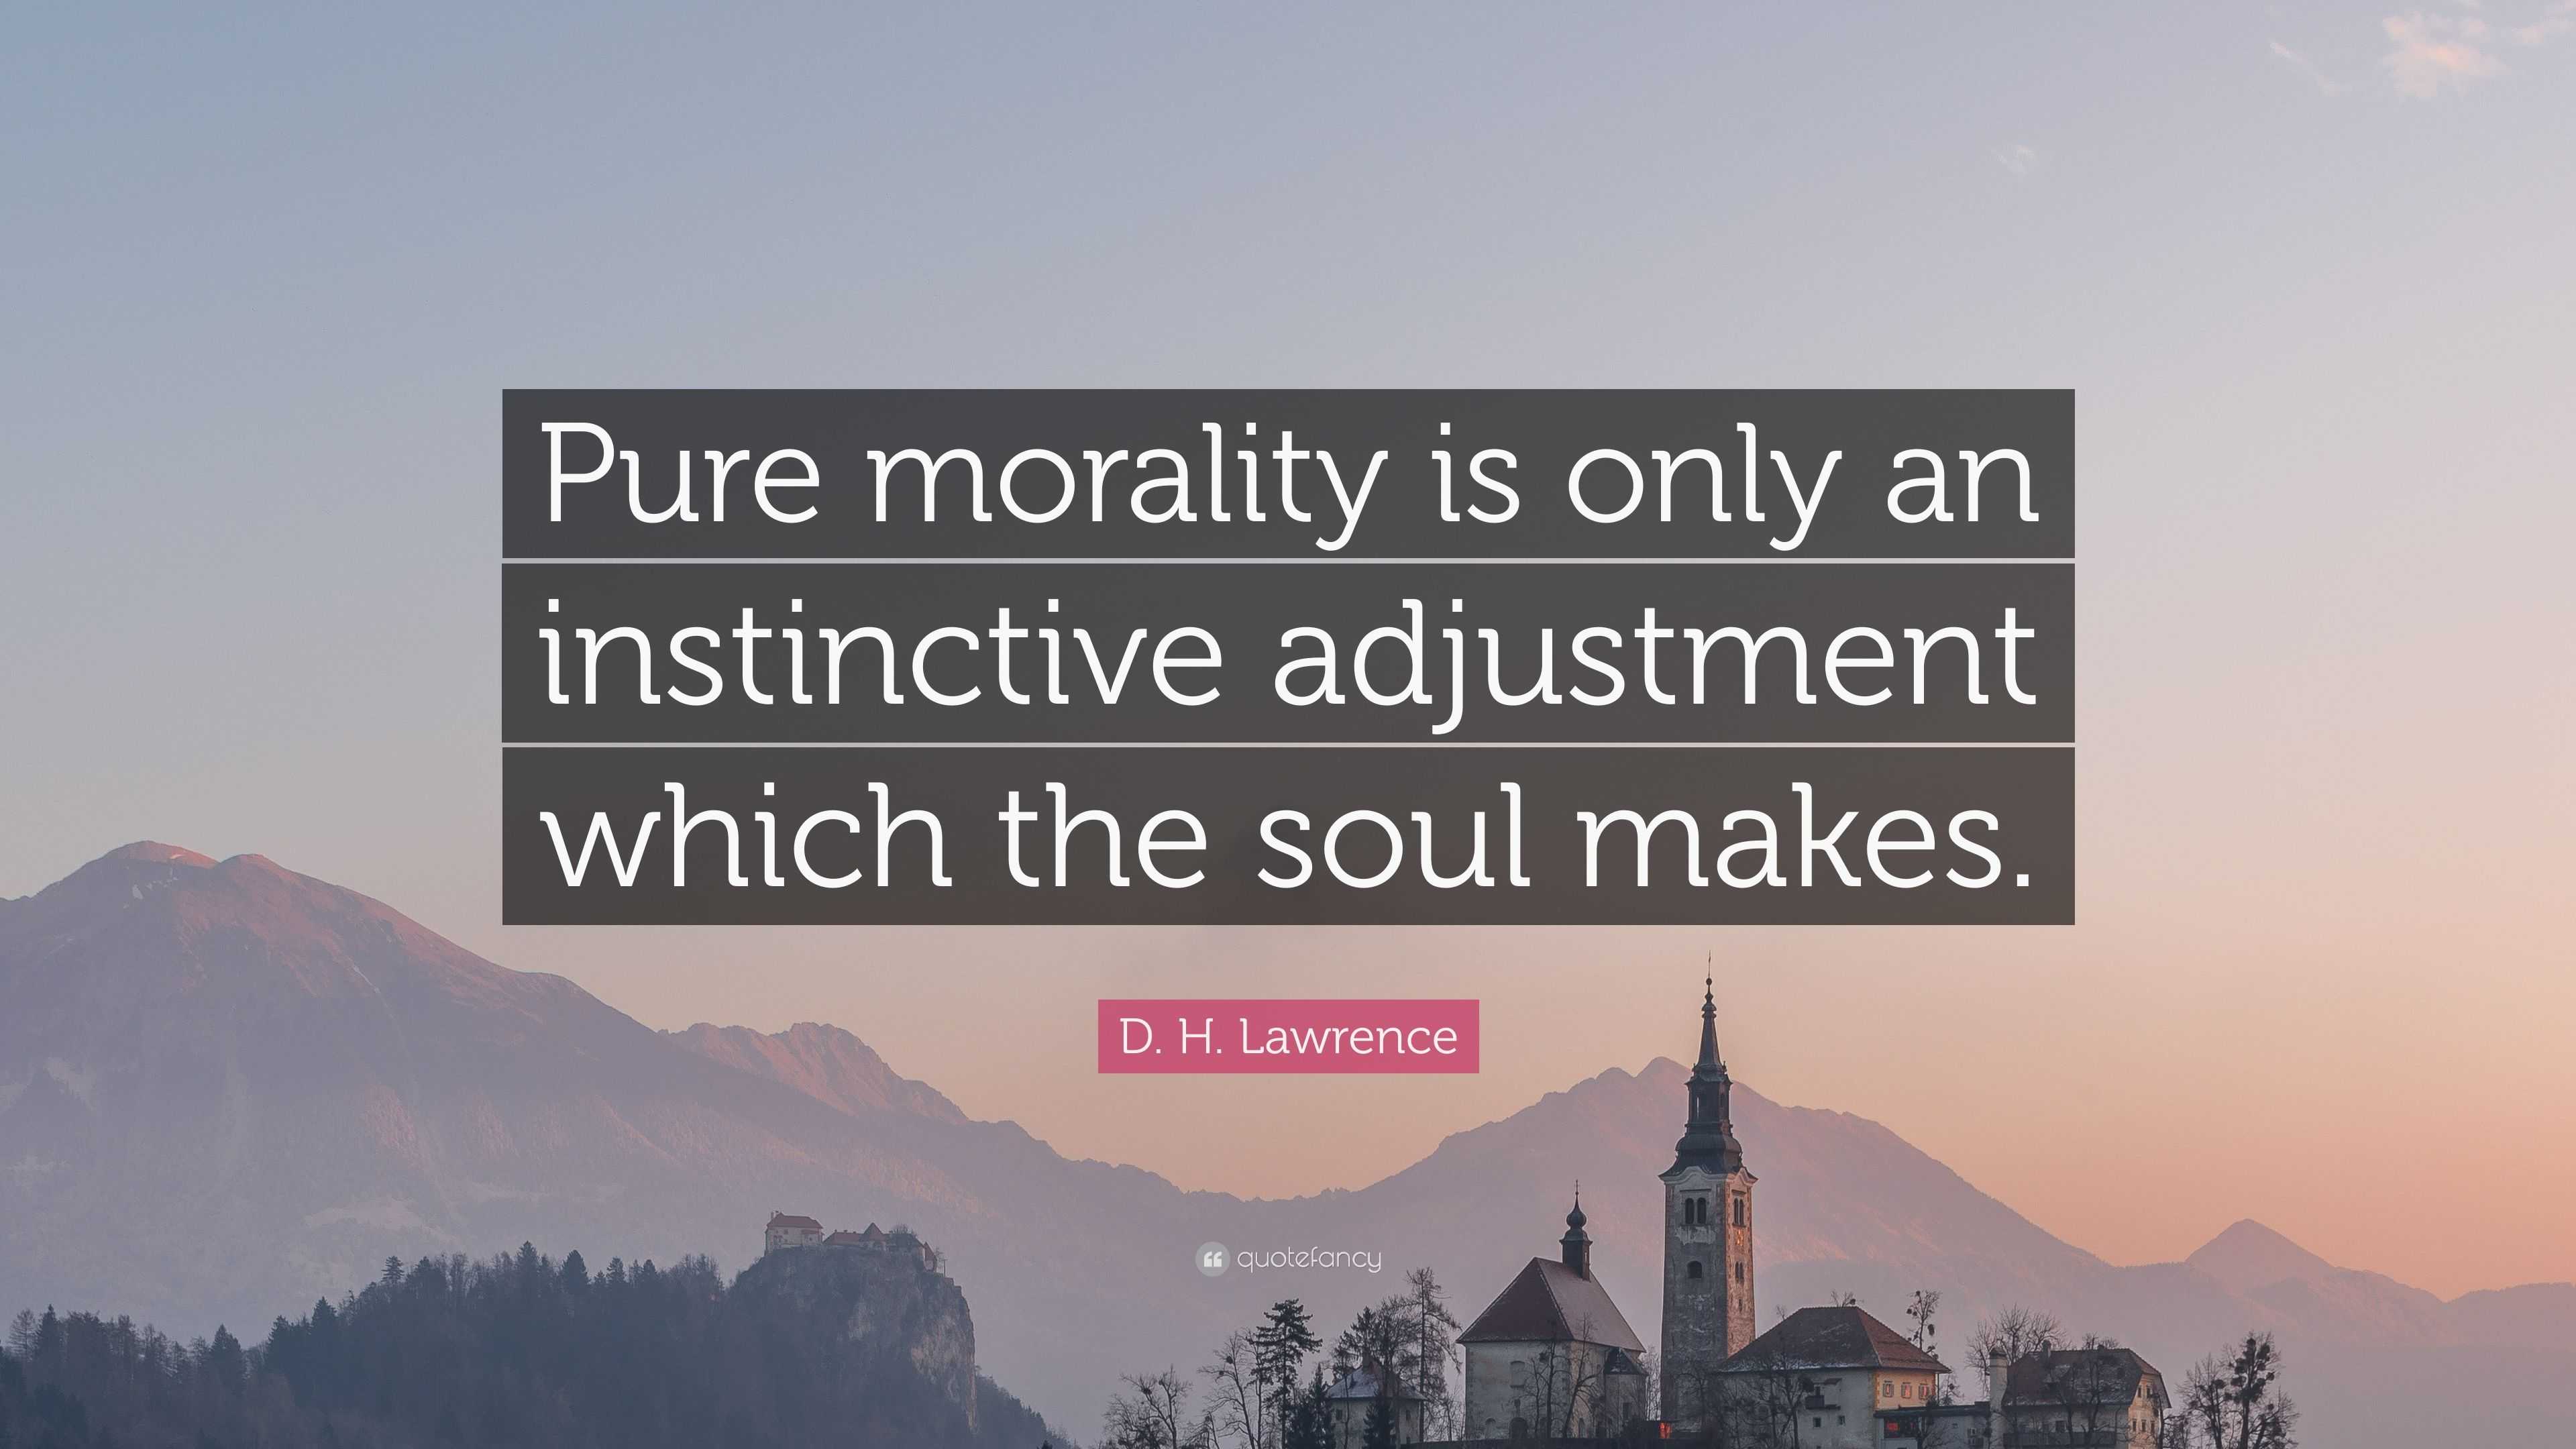 D H Lawrence Quote “pure Morality Is Only An Instinctive Adjustment Which The Soul Makes” 2215